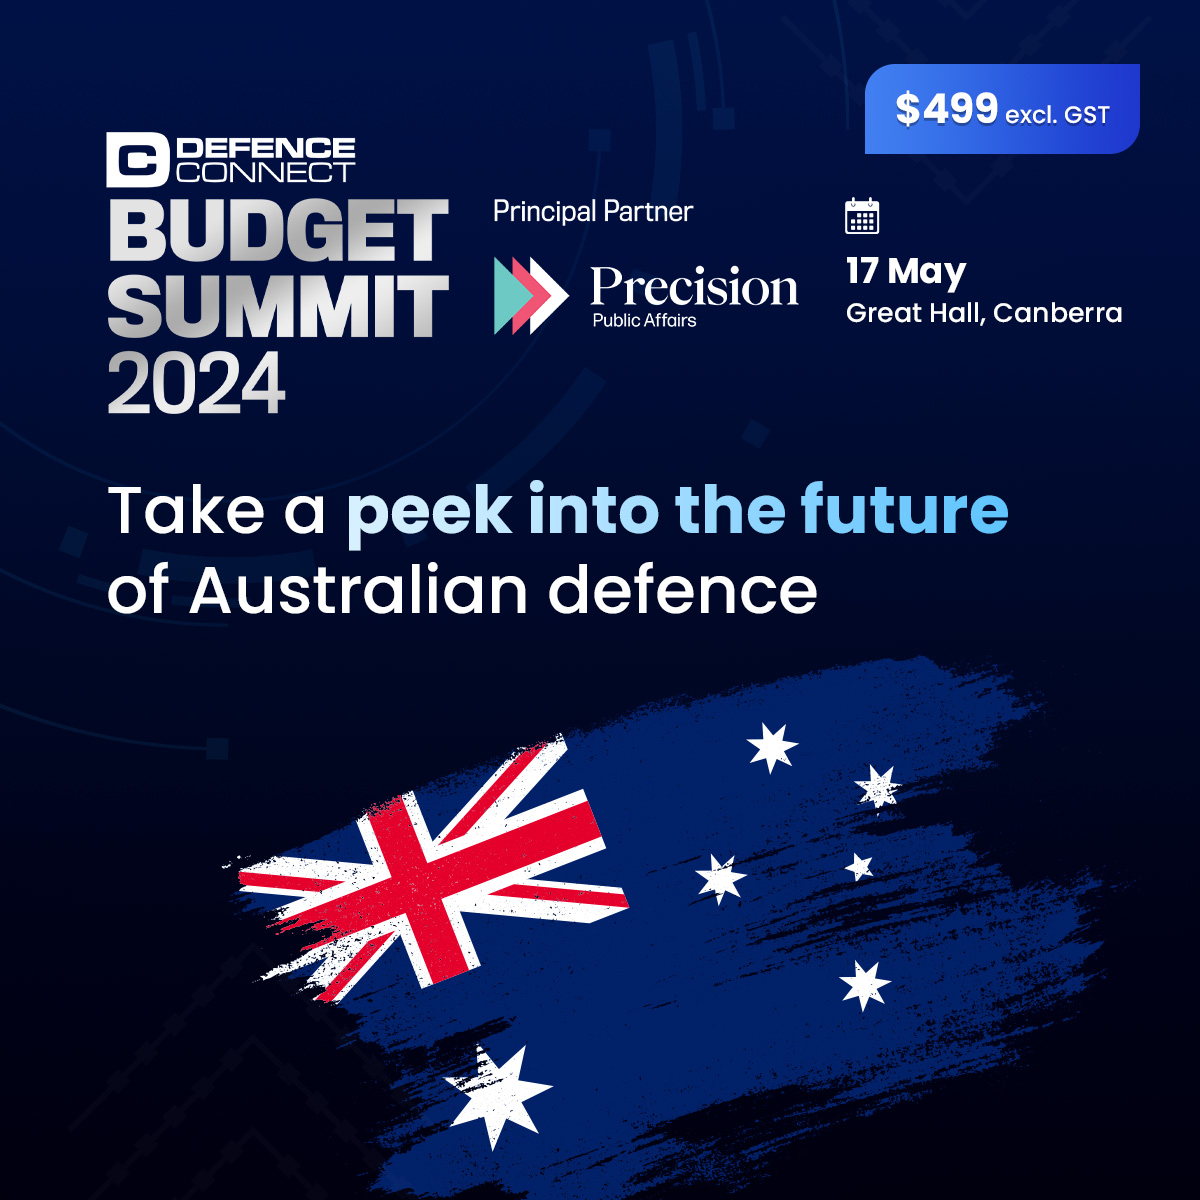 Join us at the #DefenceConnectBudgetSummit 2024 for a unique opportunity to engage directly with policymakers and influencers shaping Australia's defence landscape.
Secure your ticket now: bit.ly/3UlnNN8 

#defence #nationalsecurity #budget #governmentfunding #strategy